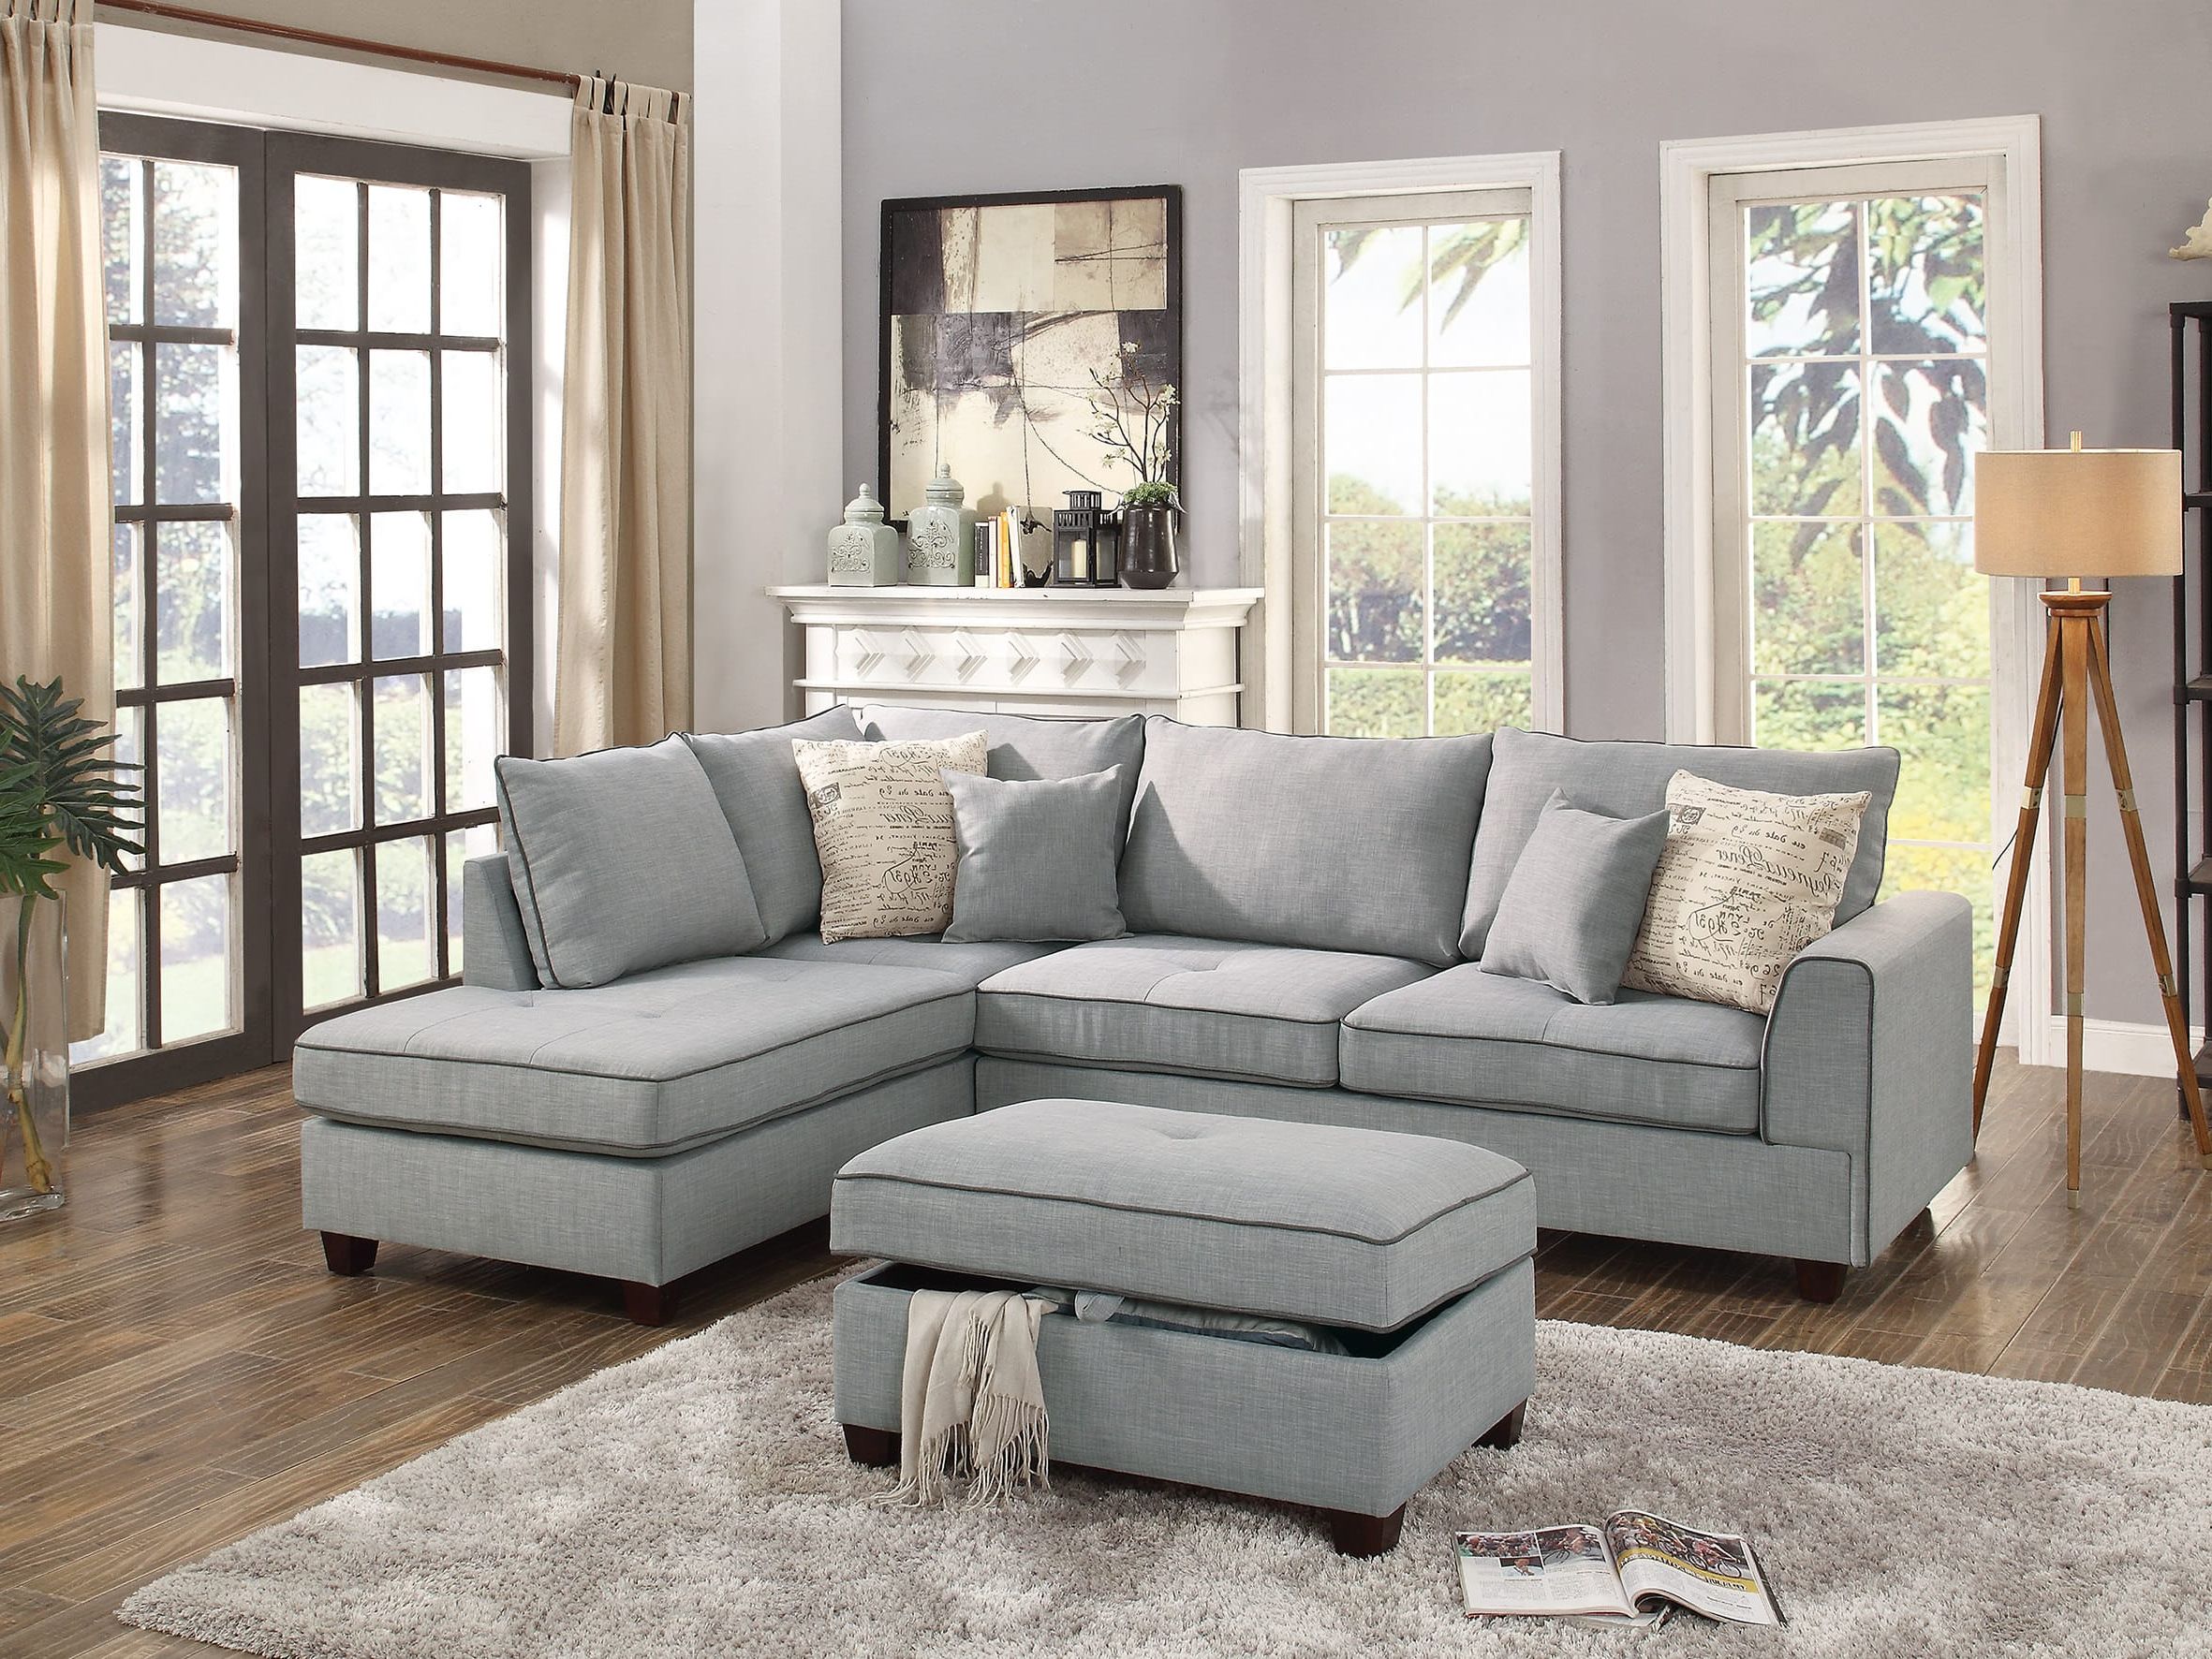 F6543 Light Gray 3 Pcs Sectional Sofa Setpoundex In Sofas In Light Gray (View 10 of 20)